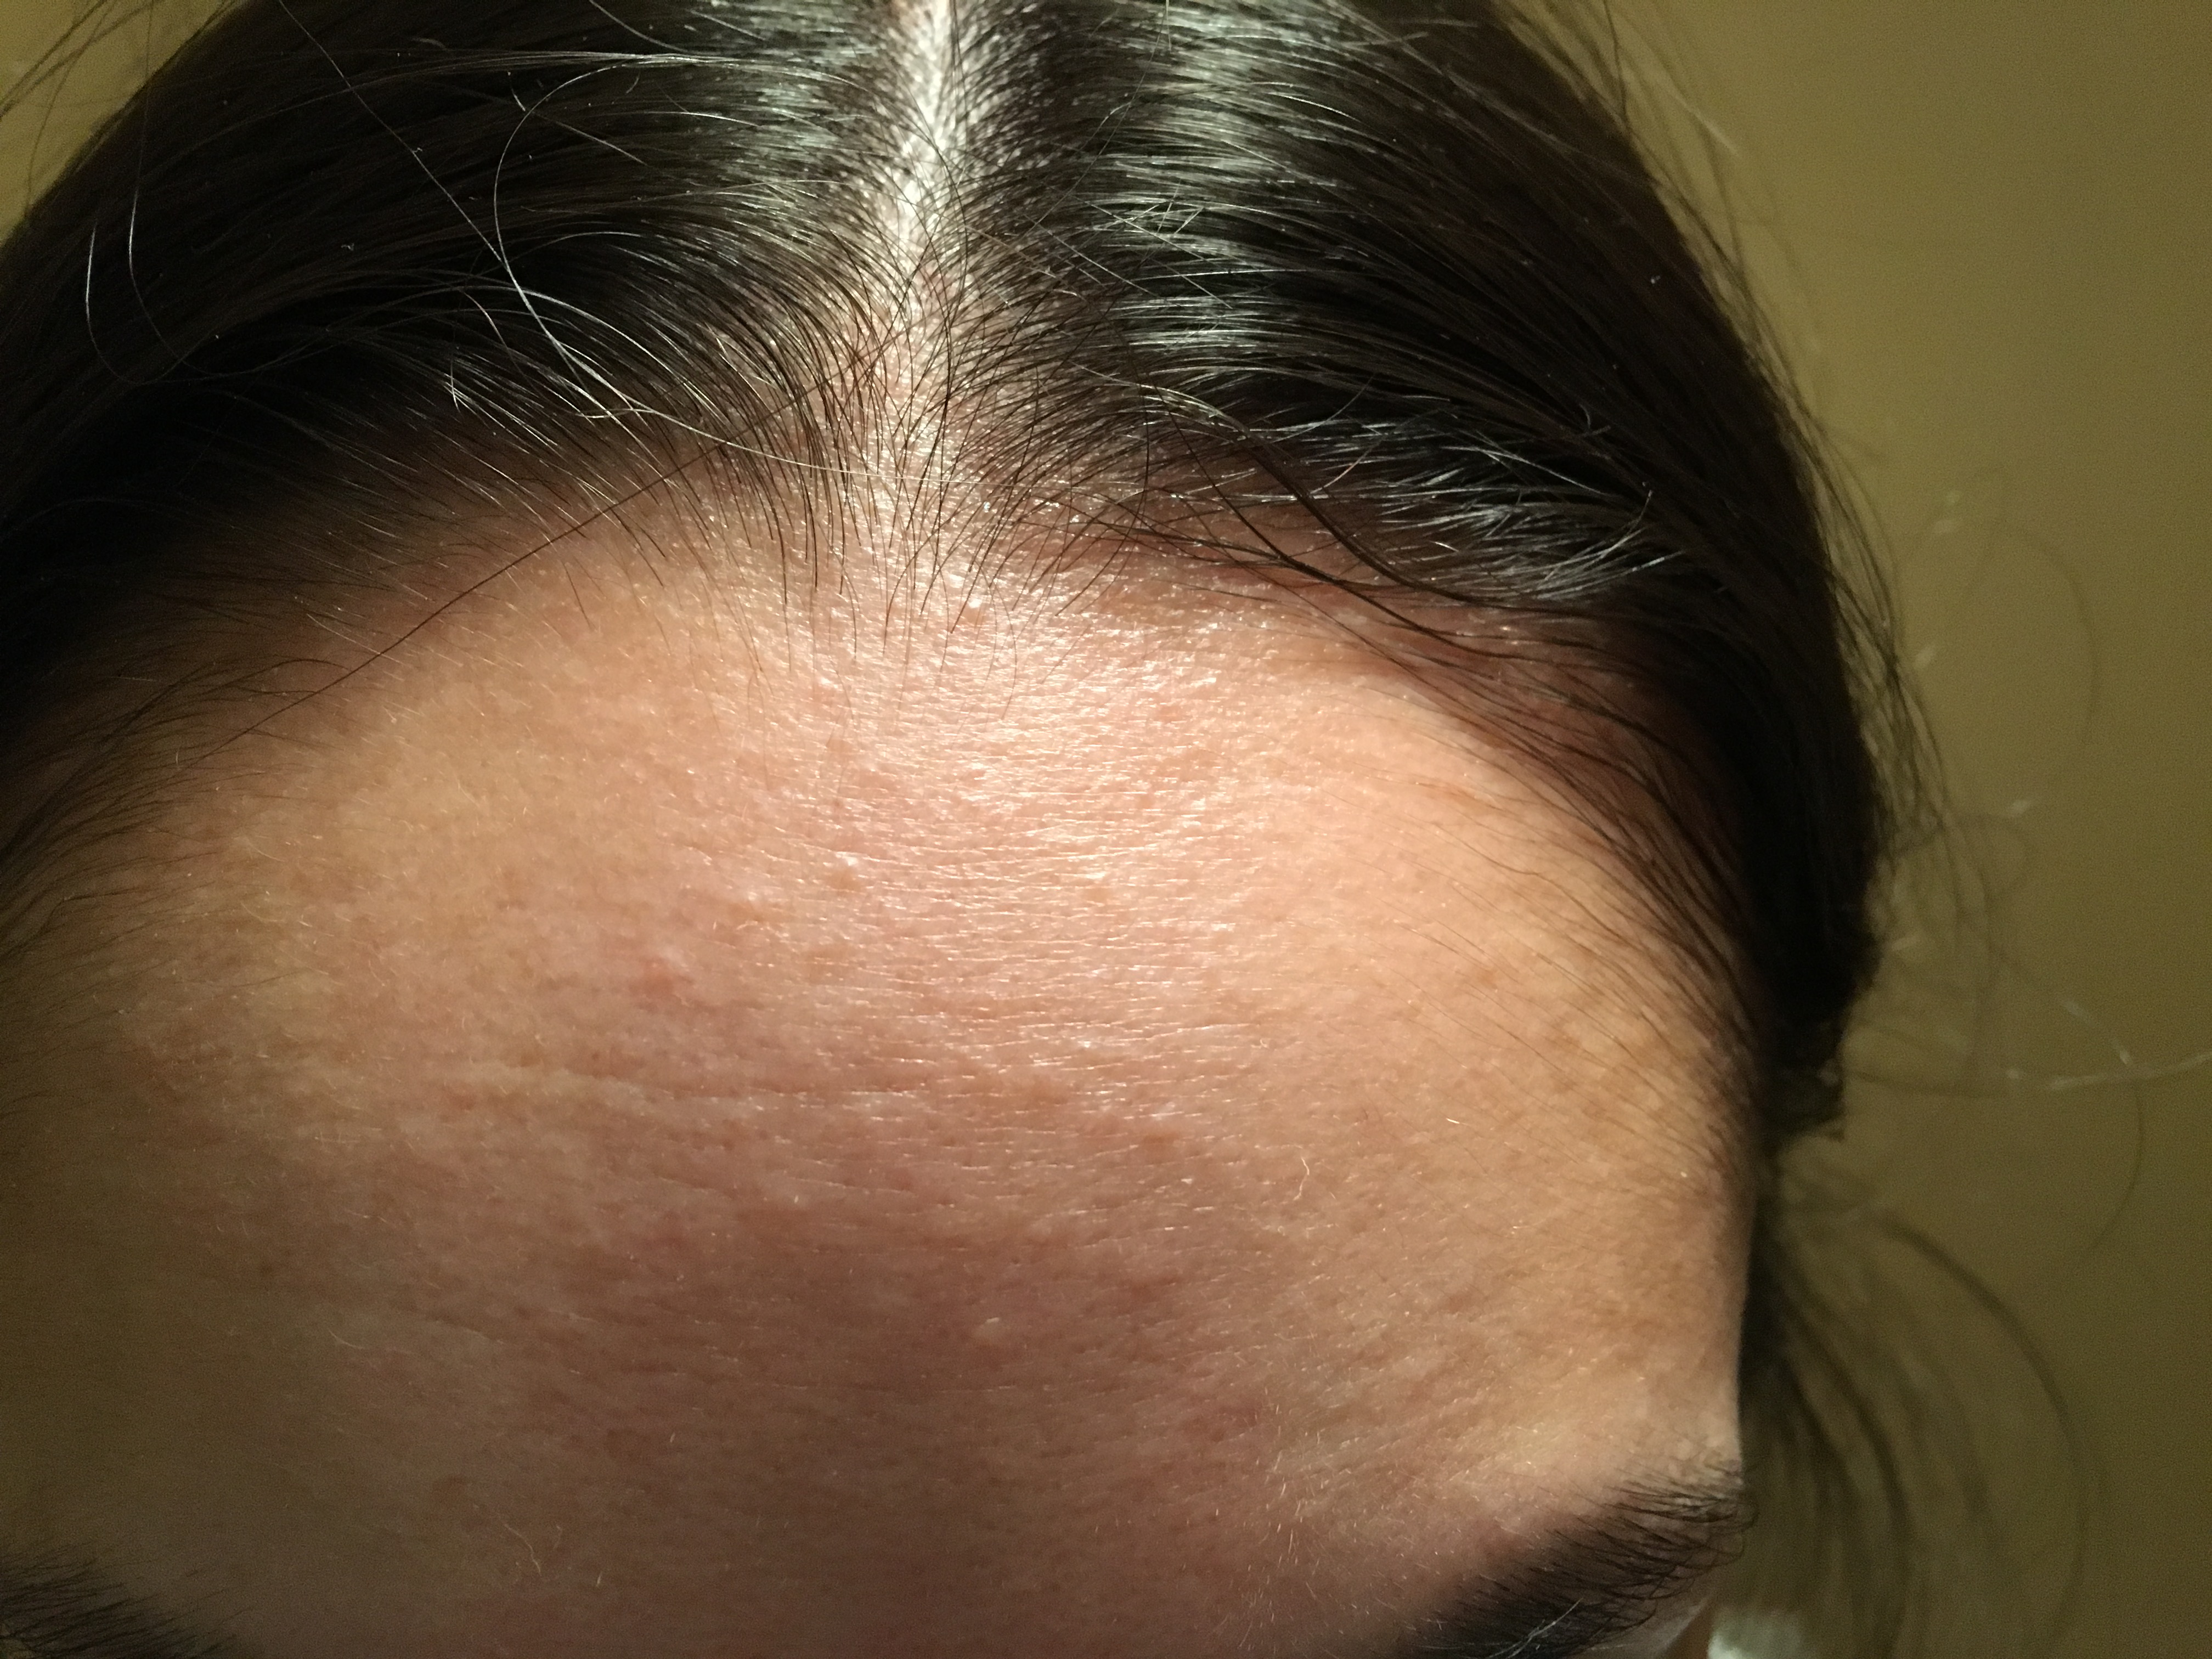 Small Forehead Bumps That Won T Go Away General Acne Discussion Acne Org